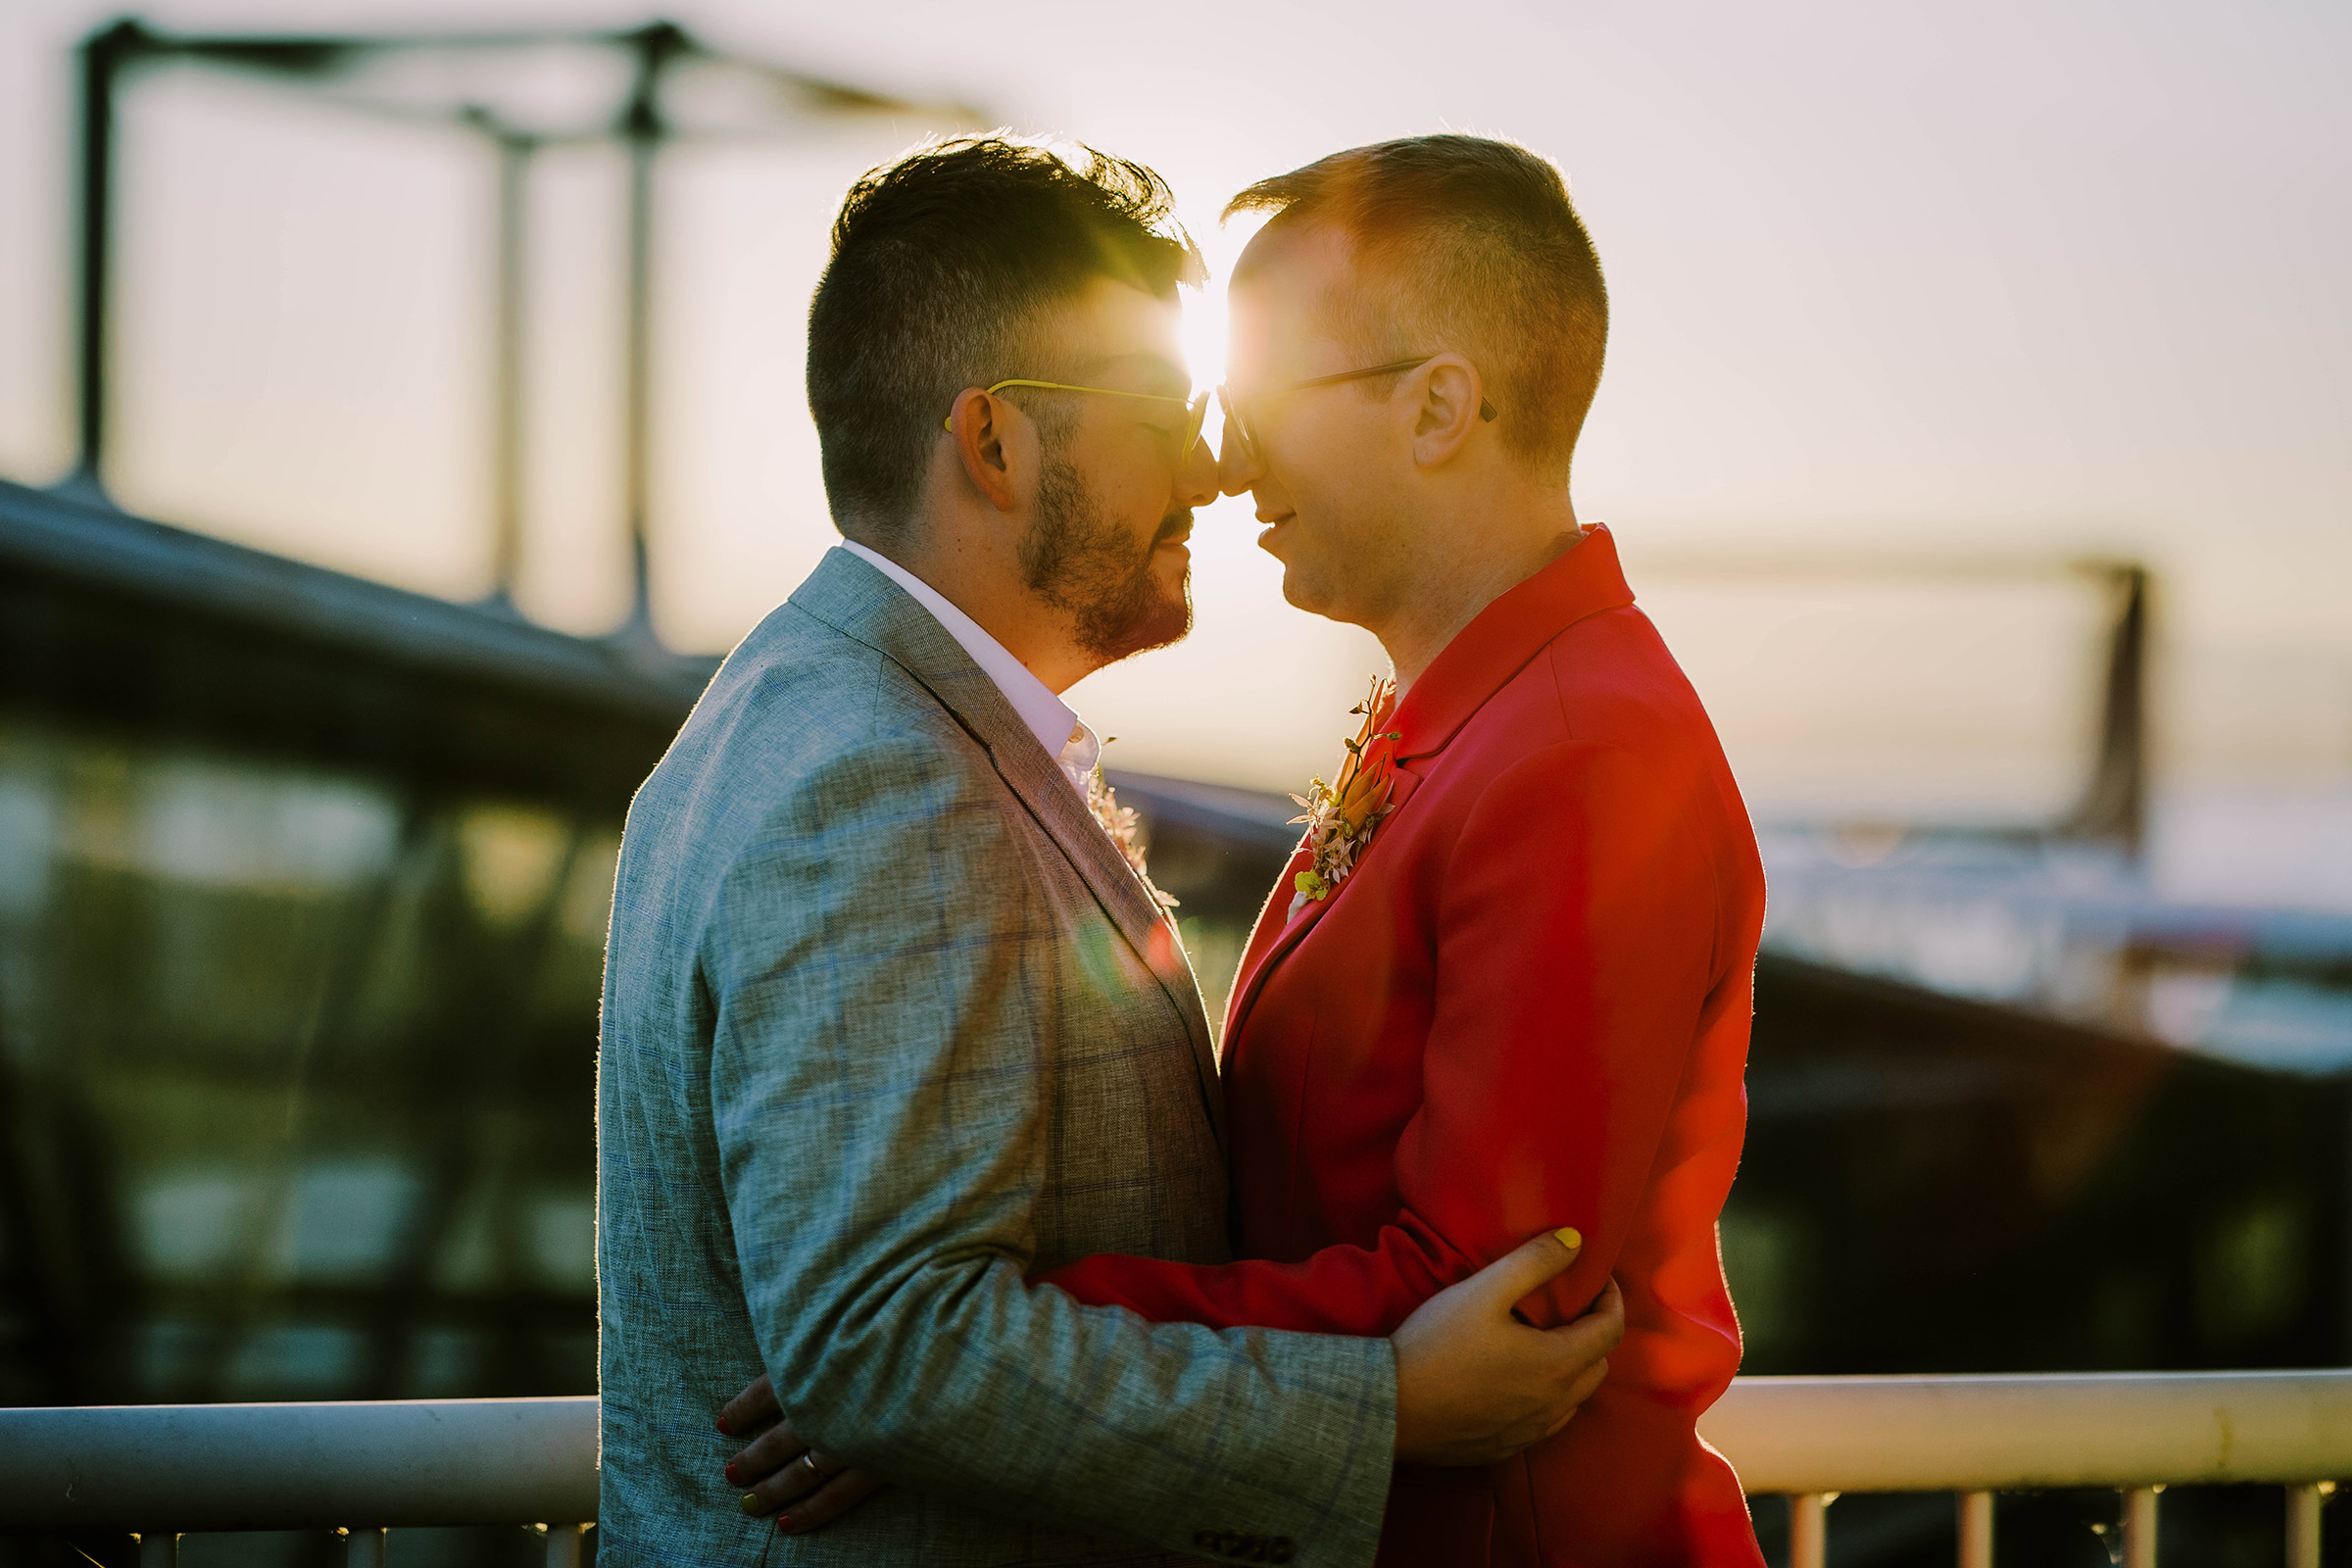 Joey and Dustin wedding photos at the Bell Harbor Conference Center rooftop in Seattle, summer 2022